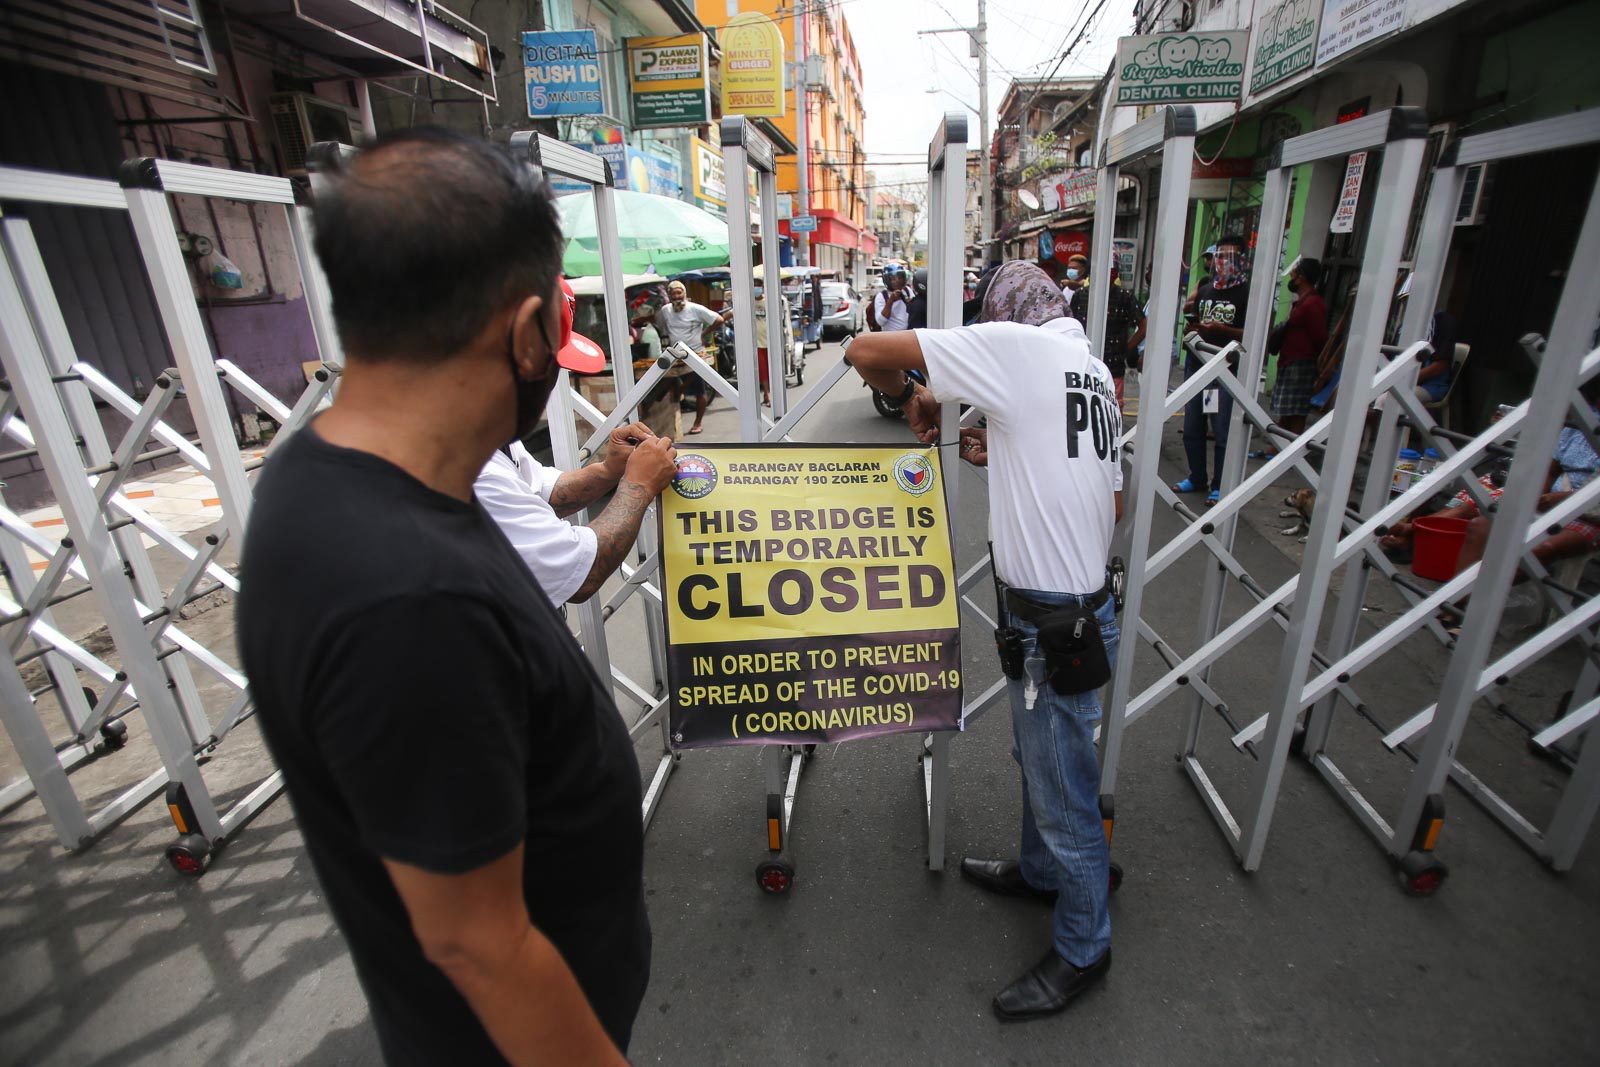 PH logs 5,404 COVID-19 cases, fourth biggest single-day tally